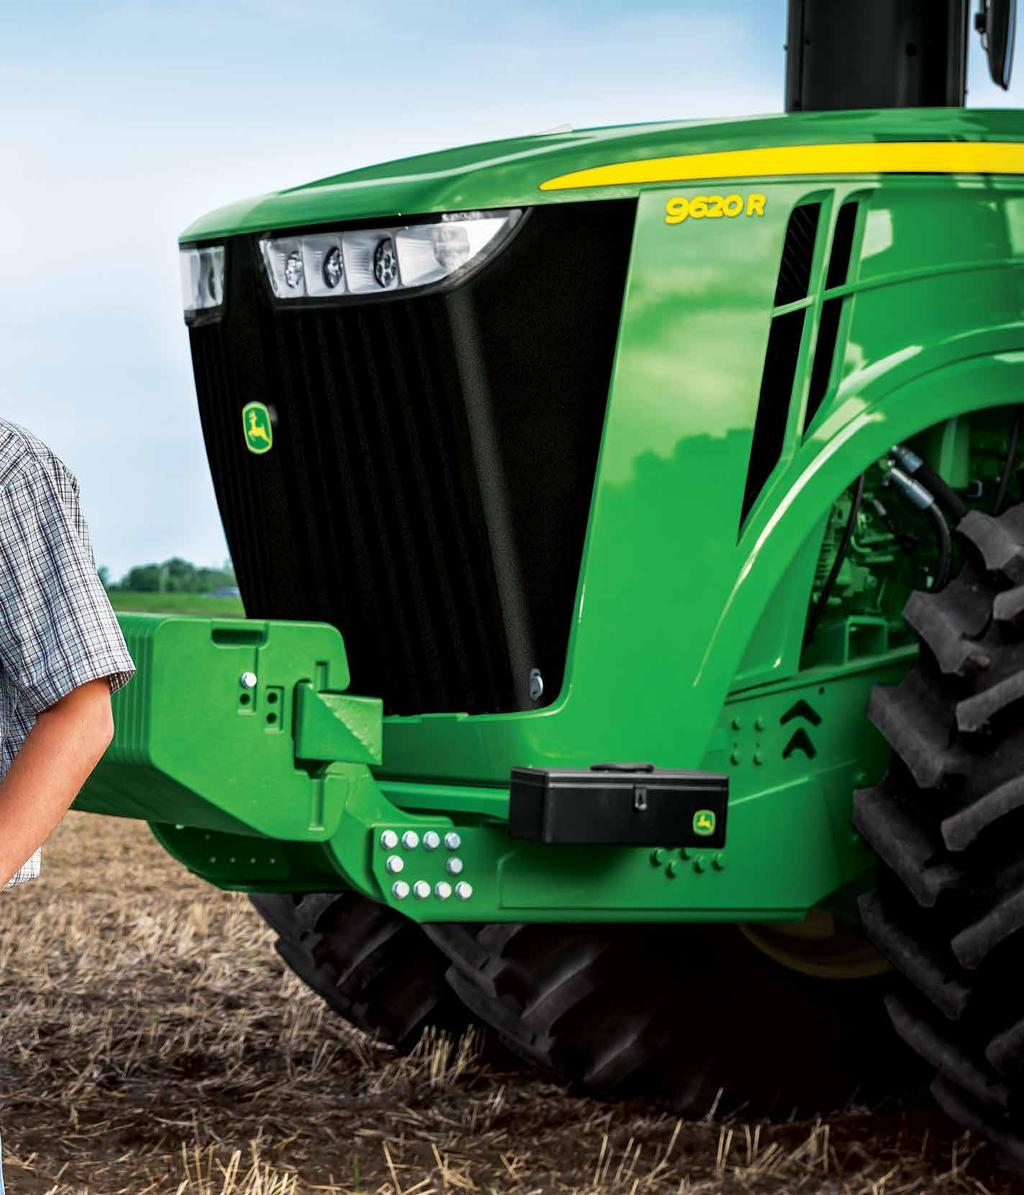 9 Family Tractors Dealer Support Record-breaking uptime is closer than you think Your 9 Family Tractor comes standard with one year of complimentary JDLink Connect*.